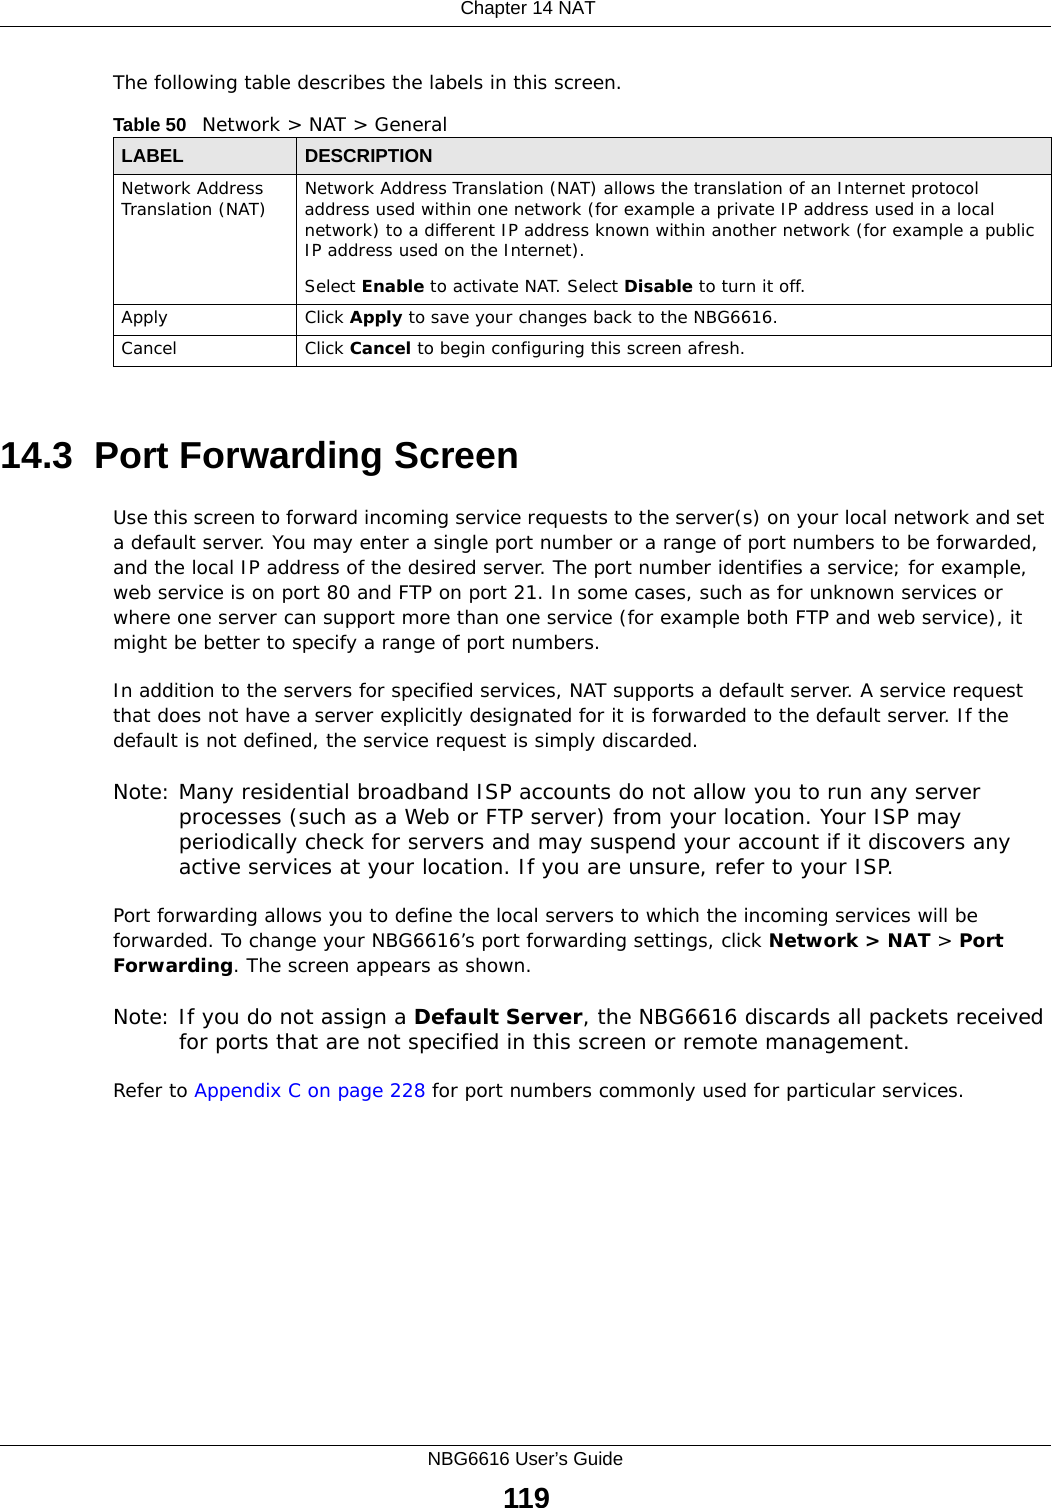  Chapter 14 NATNBG6616 User’s Guide119The following table describes the labels in this screen.14.3  Port Forwarding Screen   Use this screen to forward incoming service requests to the server(s) on your local network and set a default server. You may enter a single port number or a range of port numbers to be forwarded, and the local IP address of the desired server. The port number identifies a service; for example, web service is on port 80 and FTP on port 21. In some cases, such as for unknown services or where one server can support more than one service (for example both FTP and web service), it might be better to specify a range of port numbers.In addition to the servers for specified services, NAT supports a default server. A service request that does not have a server explicitly designated for it is forwarded to the default server. If the default is not defined, the service request is simply discarded.Note: Many residential broadband ISP accounts do not allow you to run any server processes (such as a Web or FTP server) from your location. Your ISP may periodically check for servers and may suspend your account if it discovers any active services at your location. If you are unsure, refer to your ISP.Port forwarding allows you to define the local servers to which the incoming services will be forwarded. To change your NBG6616’s port forwarding settings, click Network &gt; NAT &gt; Port Forwarding. The screen appears as shown.Note: If you do not assign a Default Server, the NBG6616 discards all packets received for ports that are not specified in this screen or remote management.Refer to Appendix C on page 228 for port numbers commonly used for particular services.Table 50   Network &gt; NAT &gt; GeneralLABEL DESCRIPTIONNetwork Address Translation (NAT) Network Address Translation (NAT) allows the translation of an Internet protocol address used within one network (for example a private IP address used in a local network) to a different IP address known within another network (for example a public IP address used on the Internet). Select Enable to activate NAT. Select Disable to turn it off.Apply Click Apply to save your changes back to the NBG6616.Cancel Click Cancel to begin configuring this screen afresh.